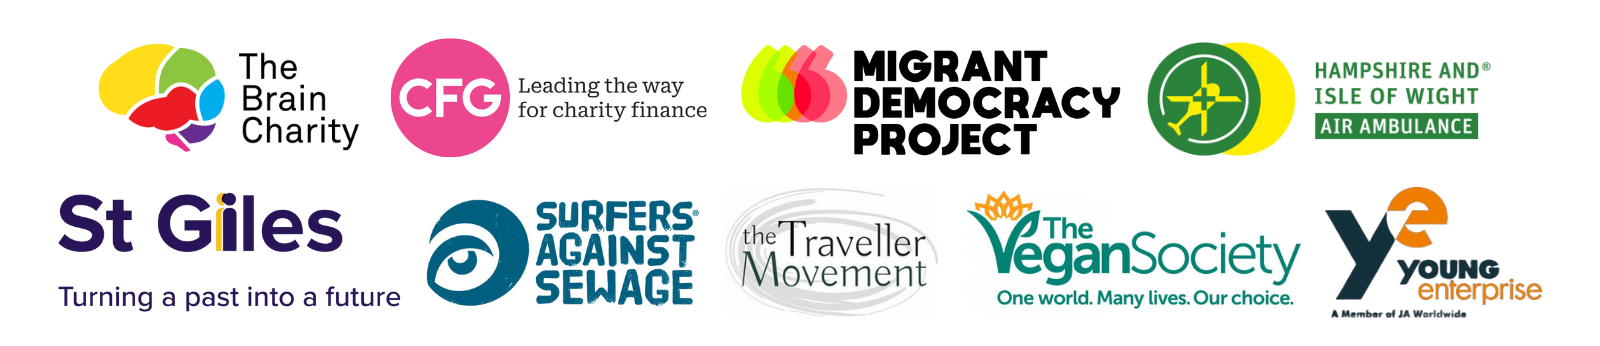 Logos for The Brain Charity, CFG, Migrant Democracy Project, HIOWAA, St Giles, Surfers Against Sewage, The Traveller Moment, The Vegan Society and Young Enterprise.